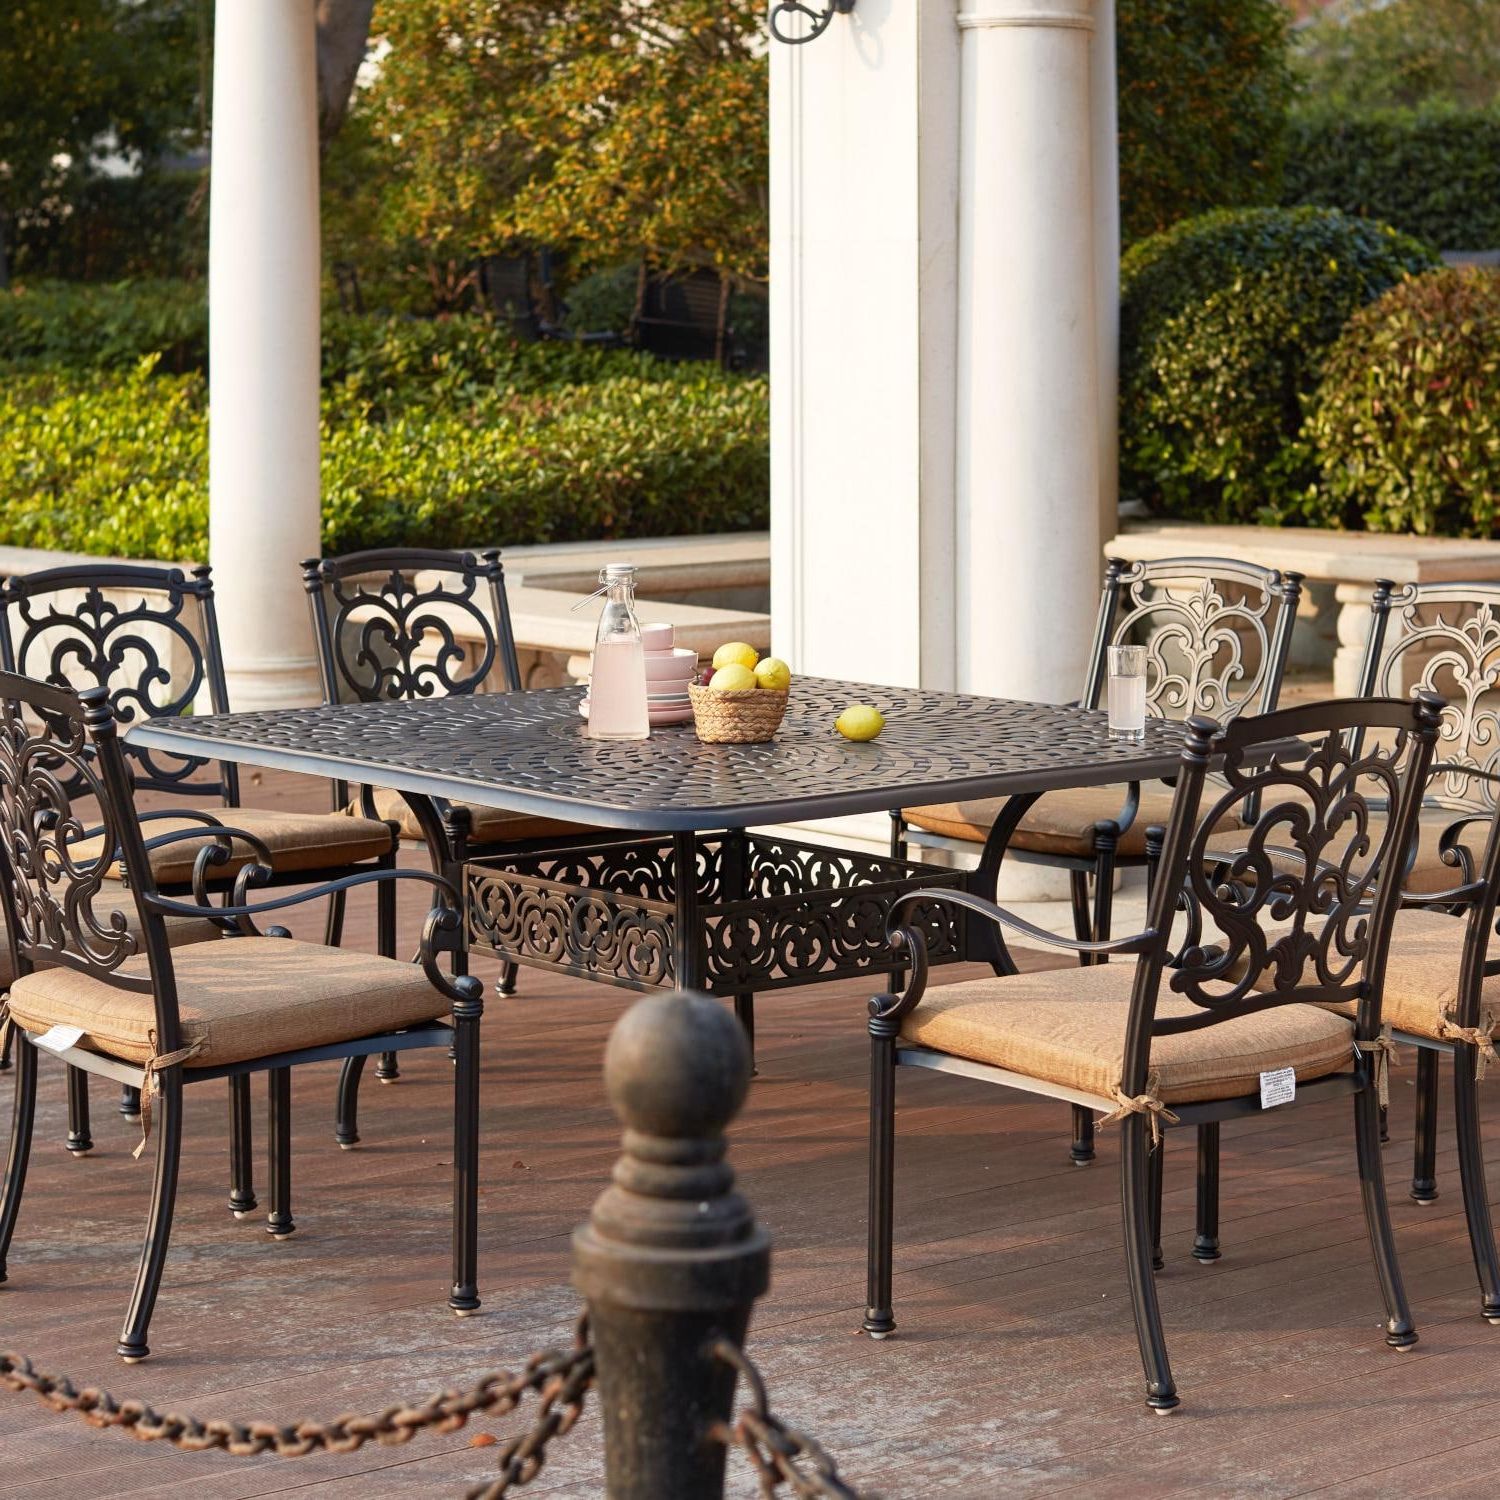 Most Popular Darlee Santa Barbara 9 Piece Cast Aluminum Patio Dining Set With Square Throughout 9 Piece Outdoor Square Dining Sets (View 7 of 15)